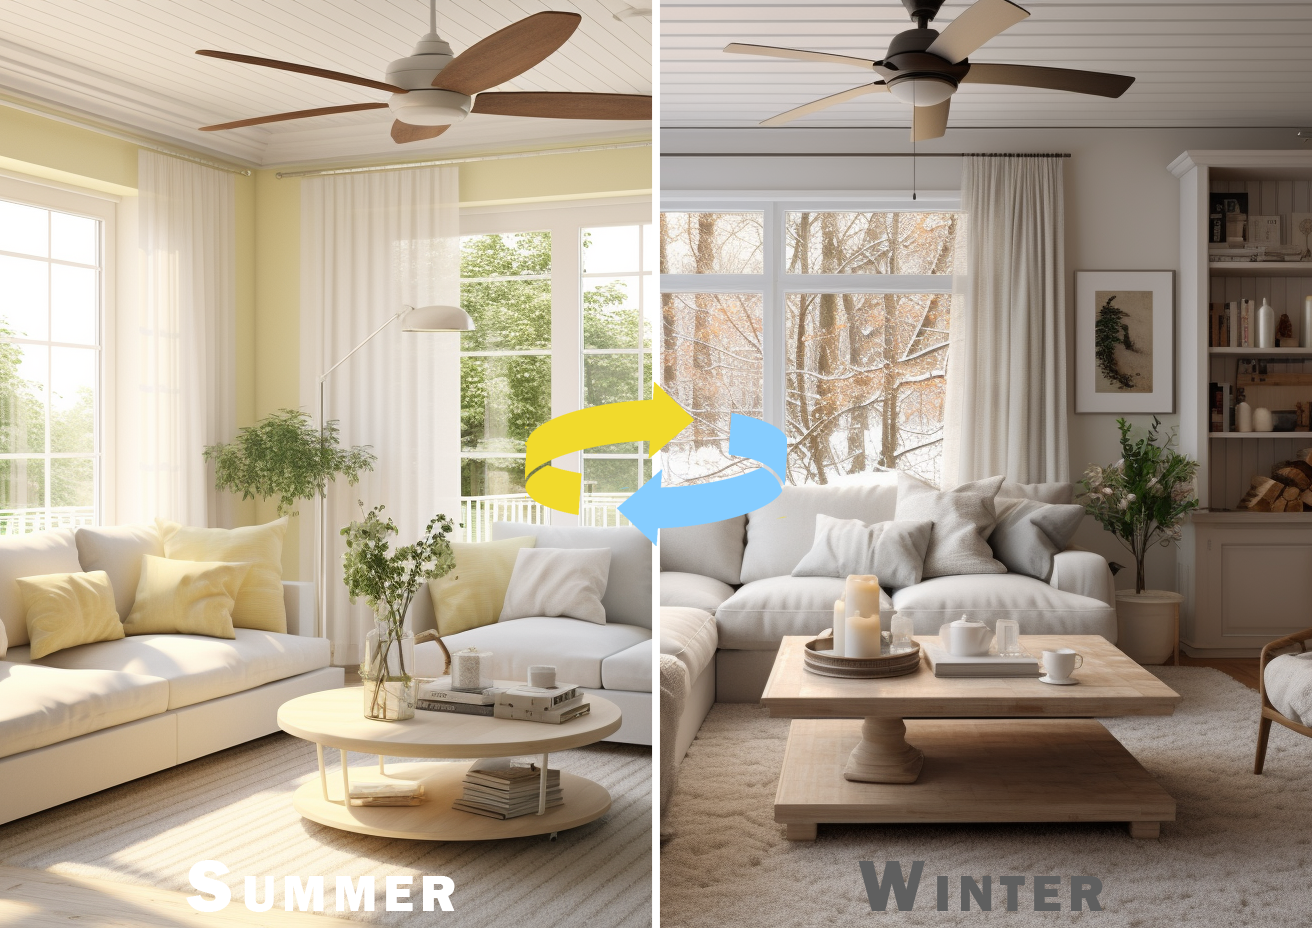 Ceiling Fan Spin In Summer And Winter